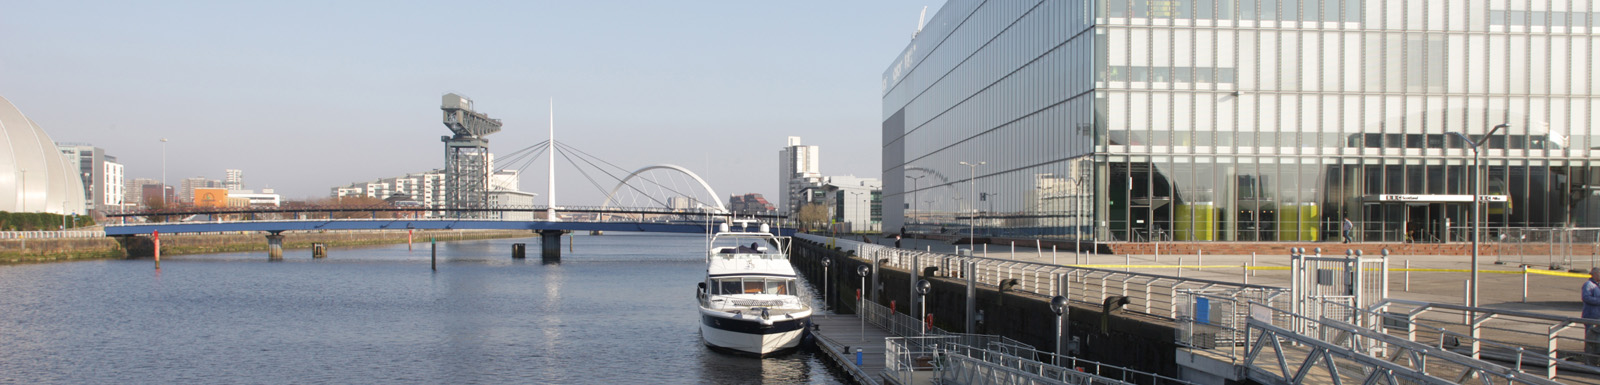 The pontoon at Pacific Quay